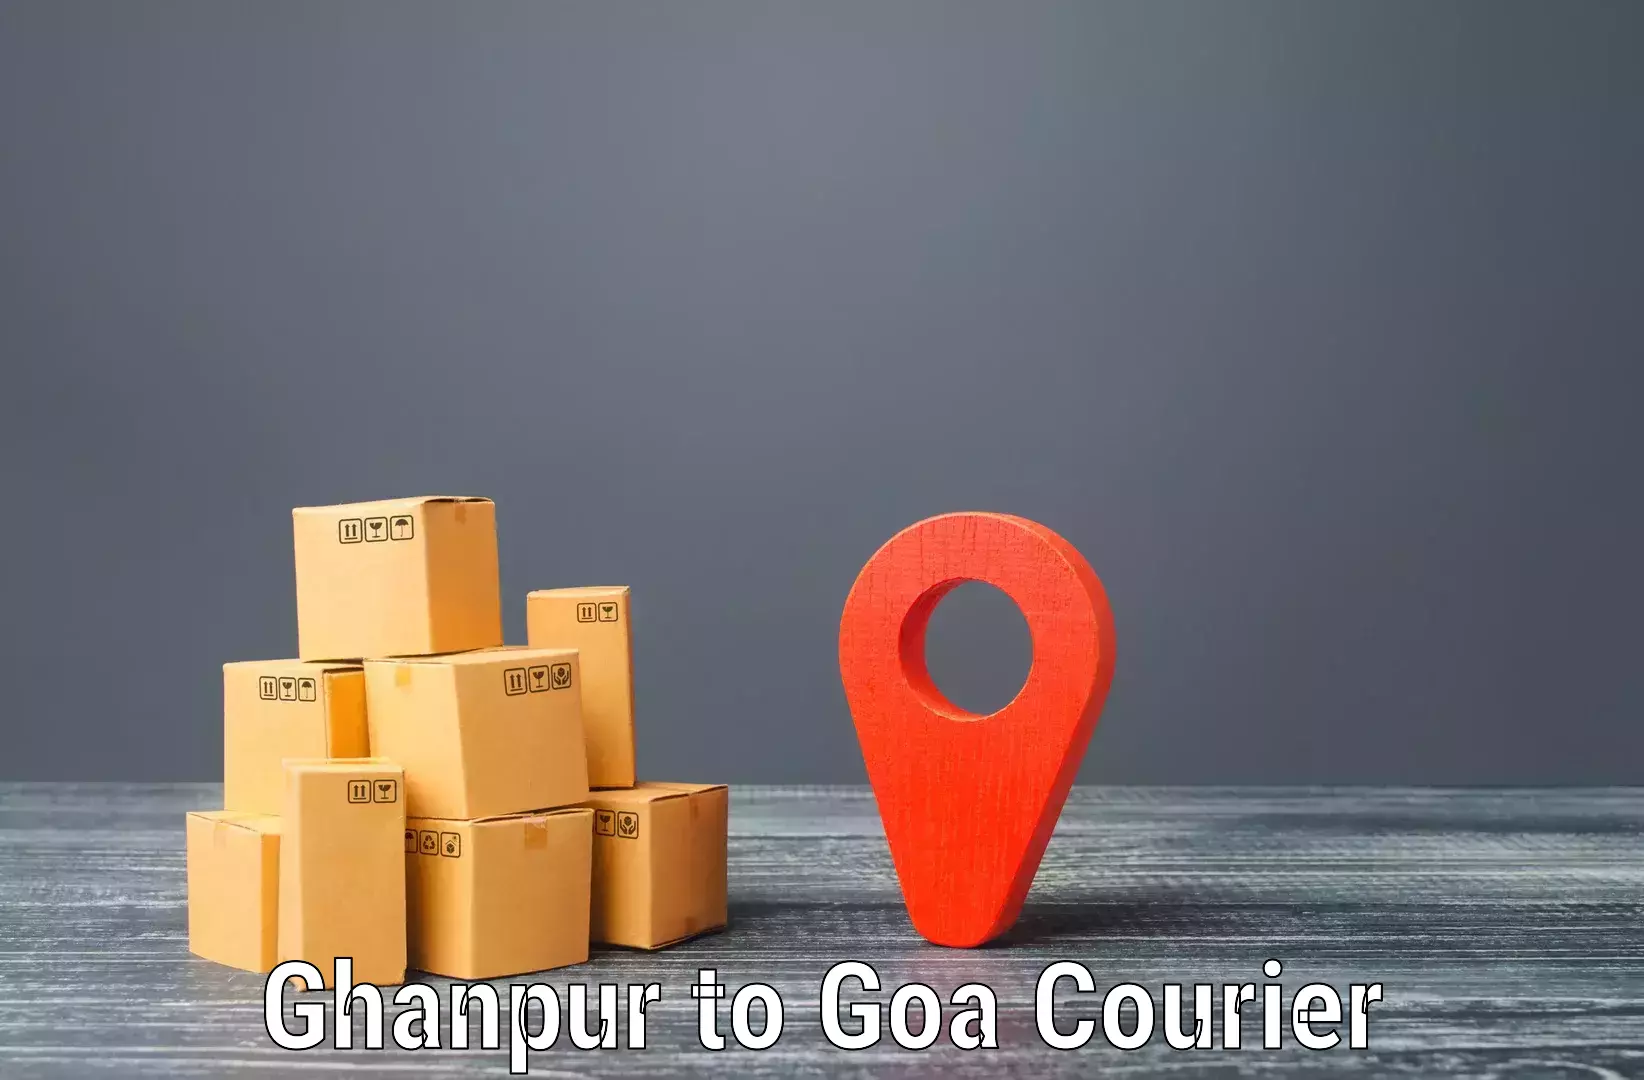 24/7 courier service Ghanpur to Ponda